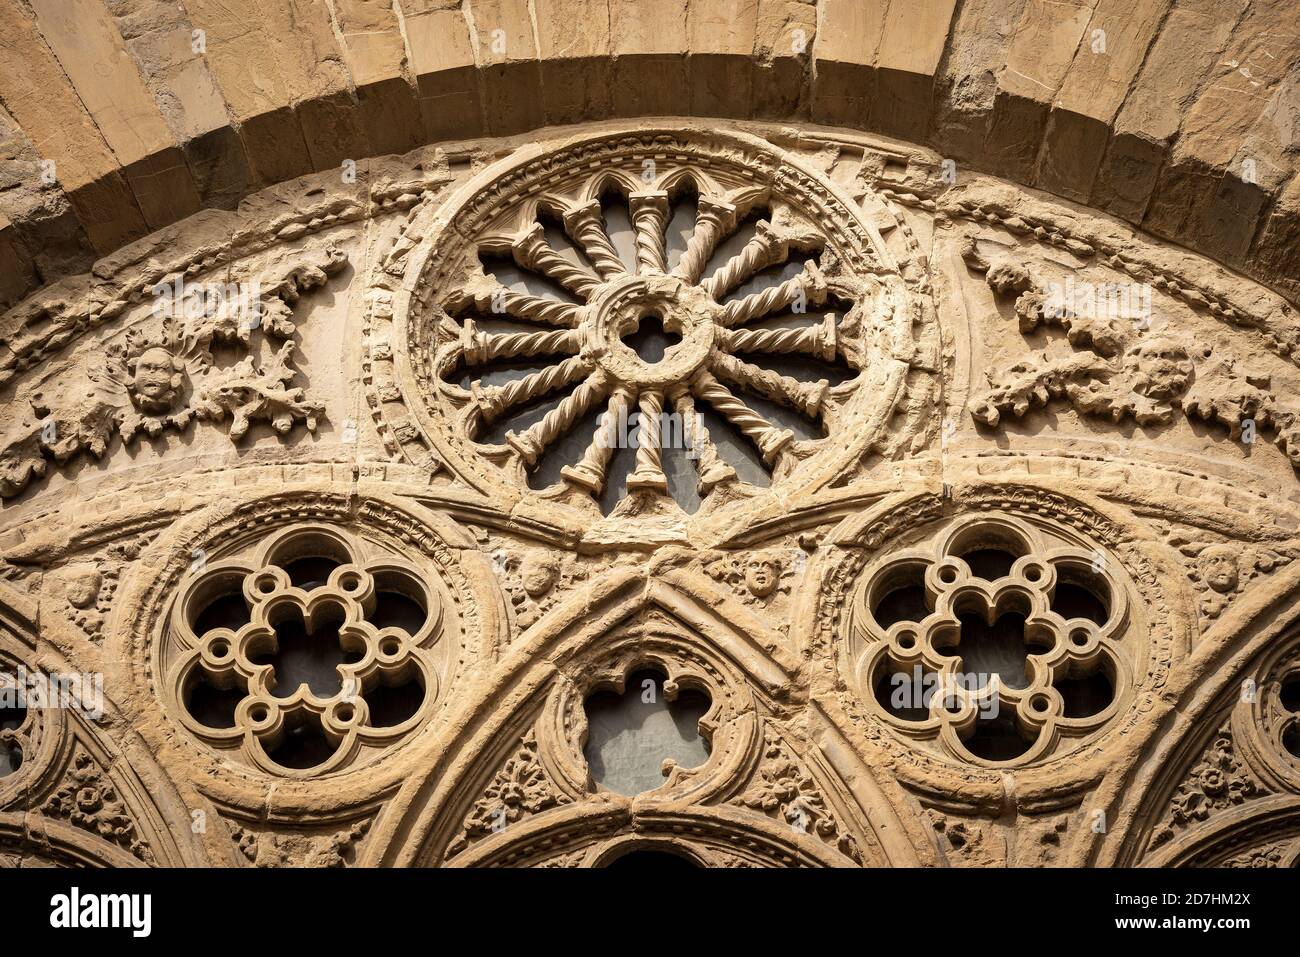 Architectural detail of the church of Orsanmichele in gothic style (1337-1380) in Florence downtown. Tuscany, Italy, Europe. Stock Photo